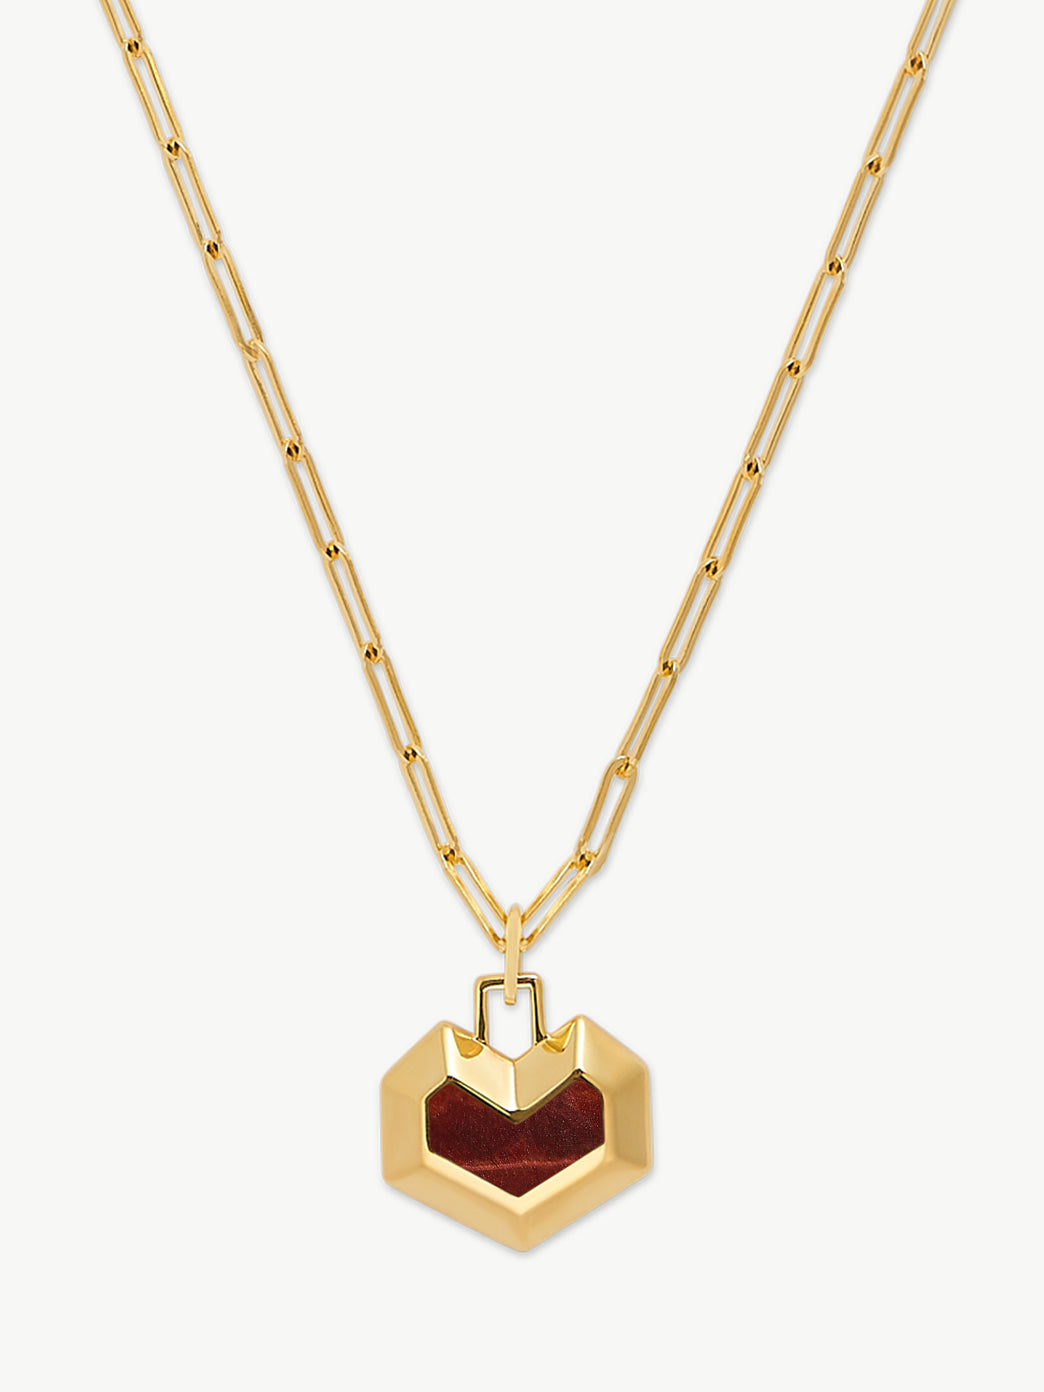 DARYL NECKLACE <br> 18k Gold Plated - Red Tiger Eye